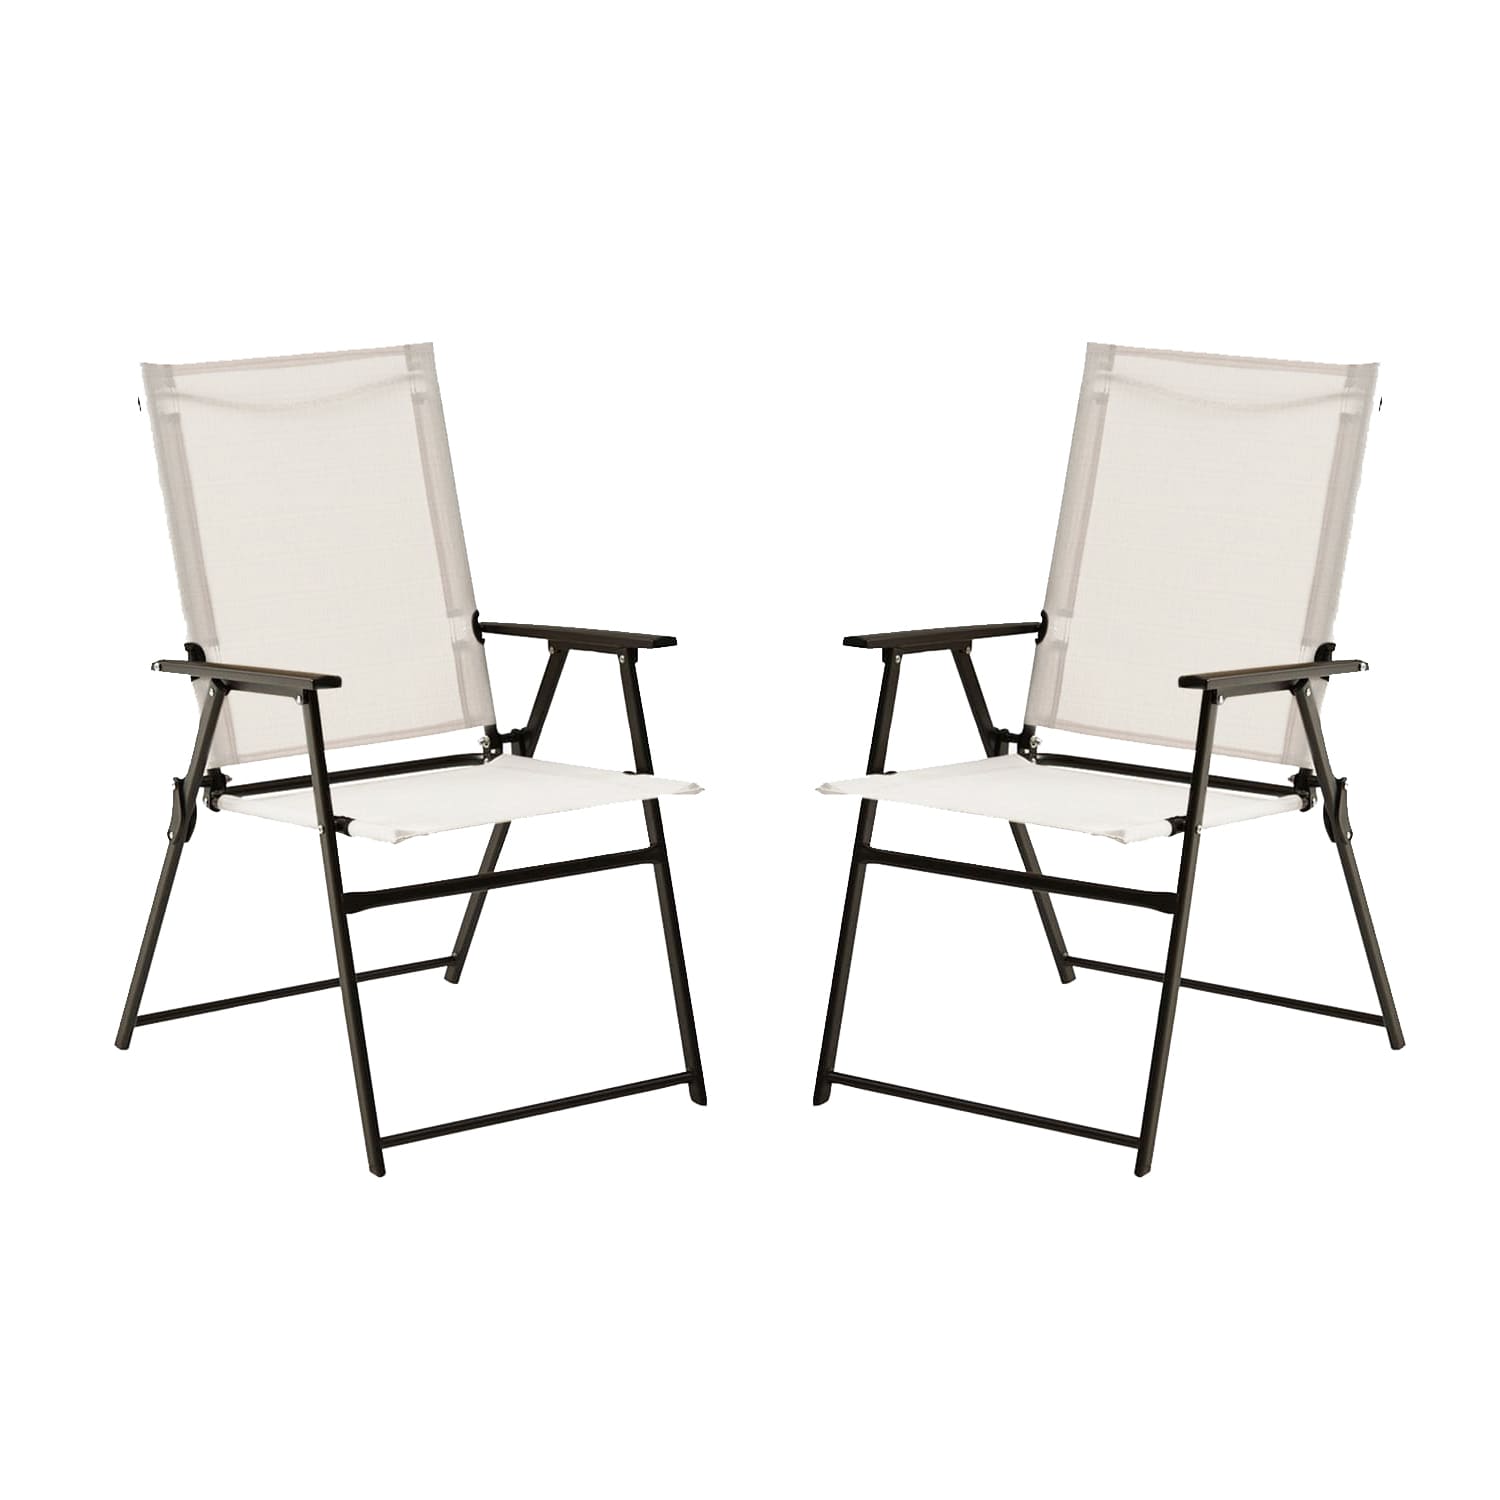 Vicllax Outdoor Folding Chairs, Patio Lawn Garden Chair Set of 2/4/6